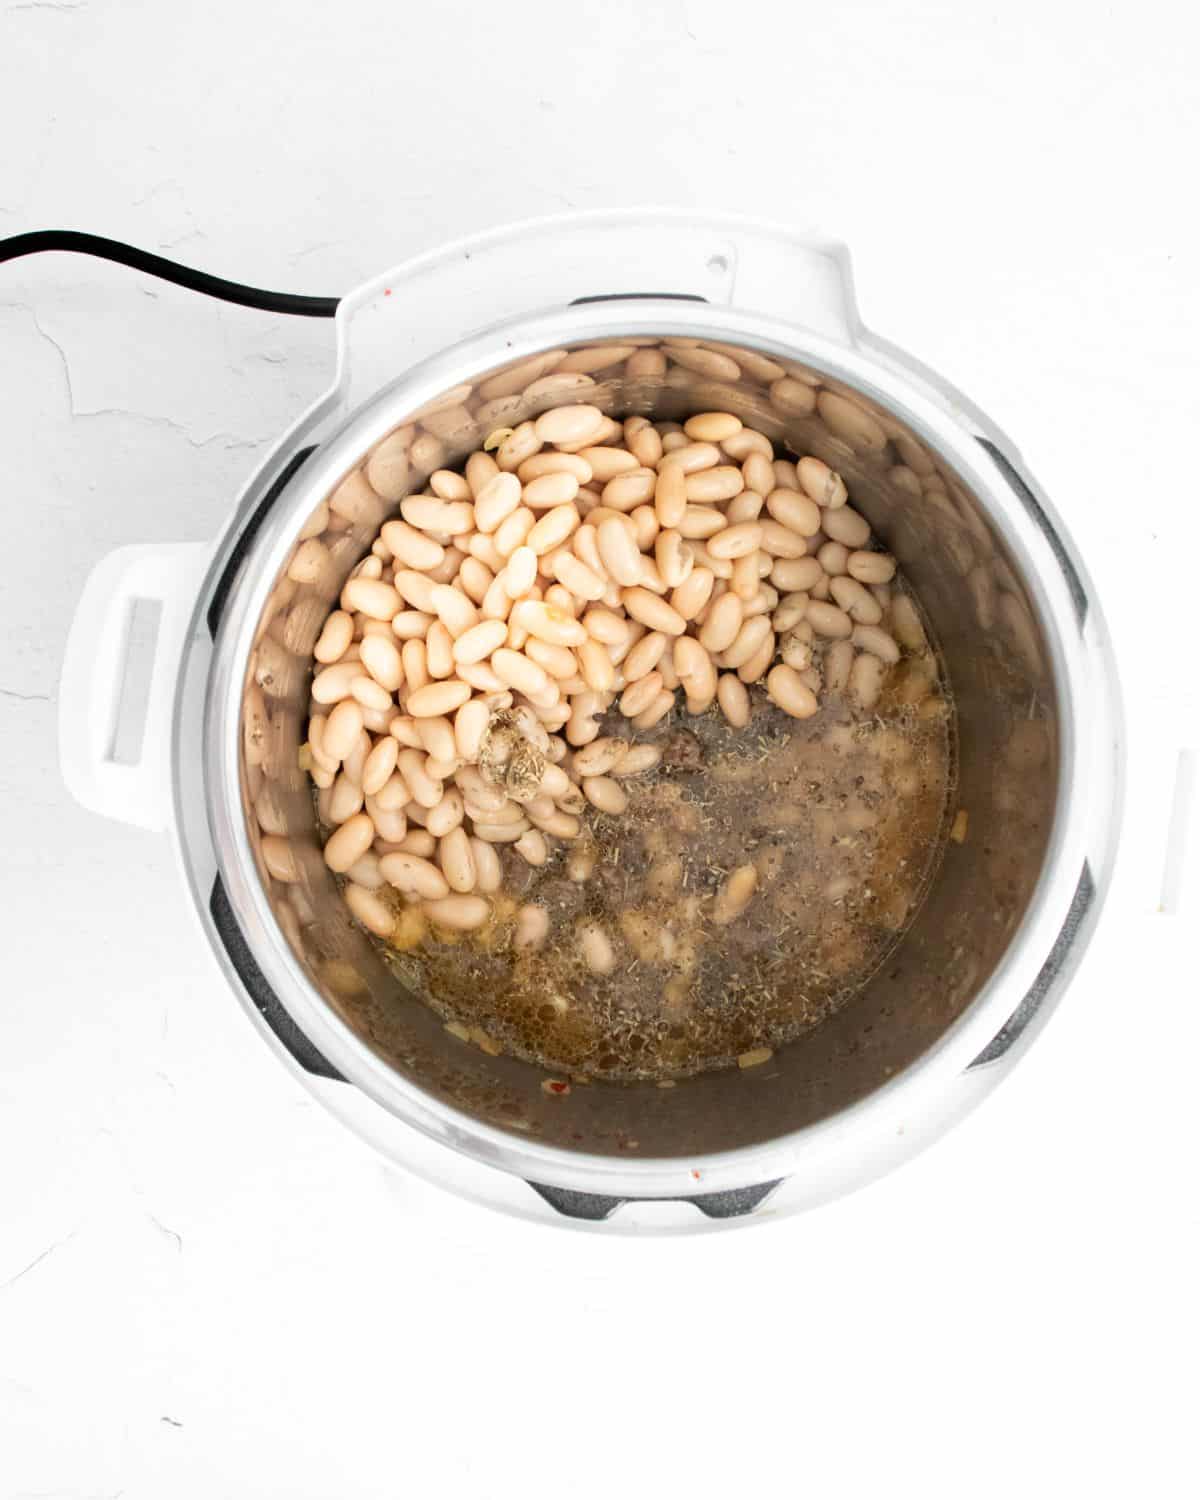 White beans and sausage cooked in an instant pot.